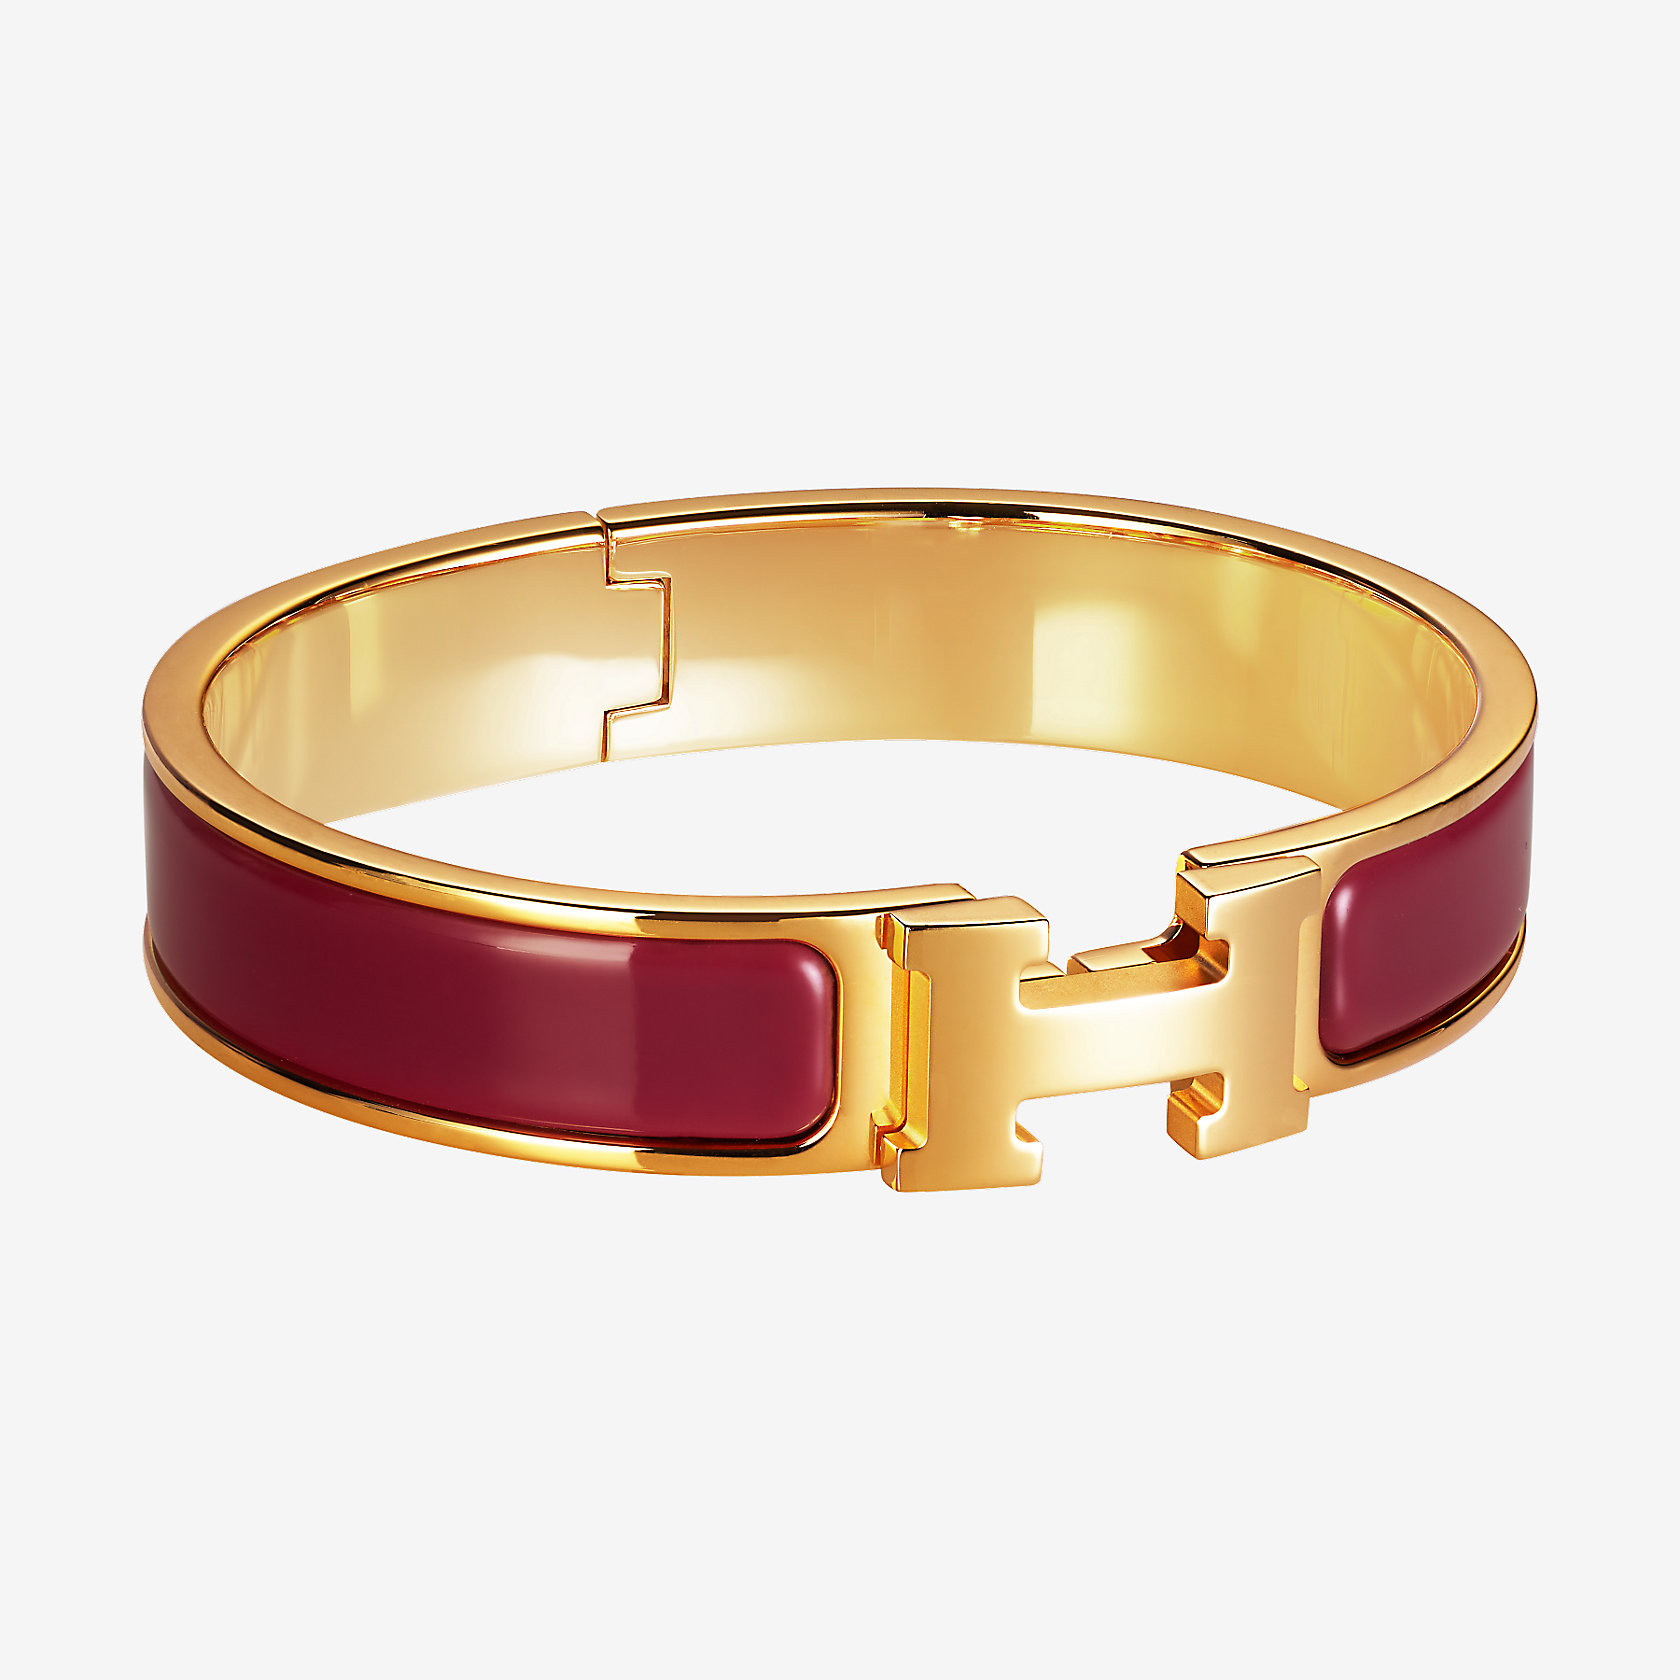 The Best Hermes Clic H Bracelet - Home, Family, Style and Art Ideas